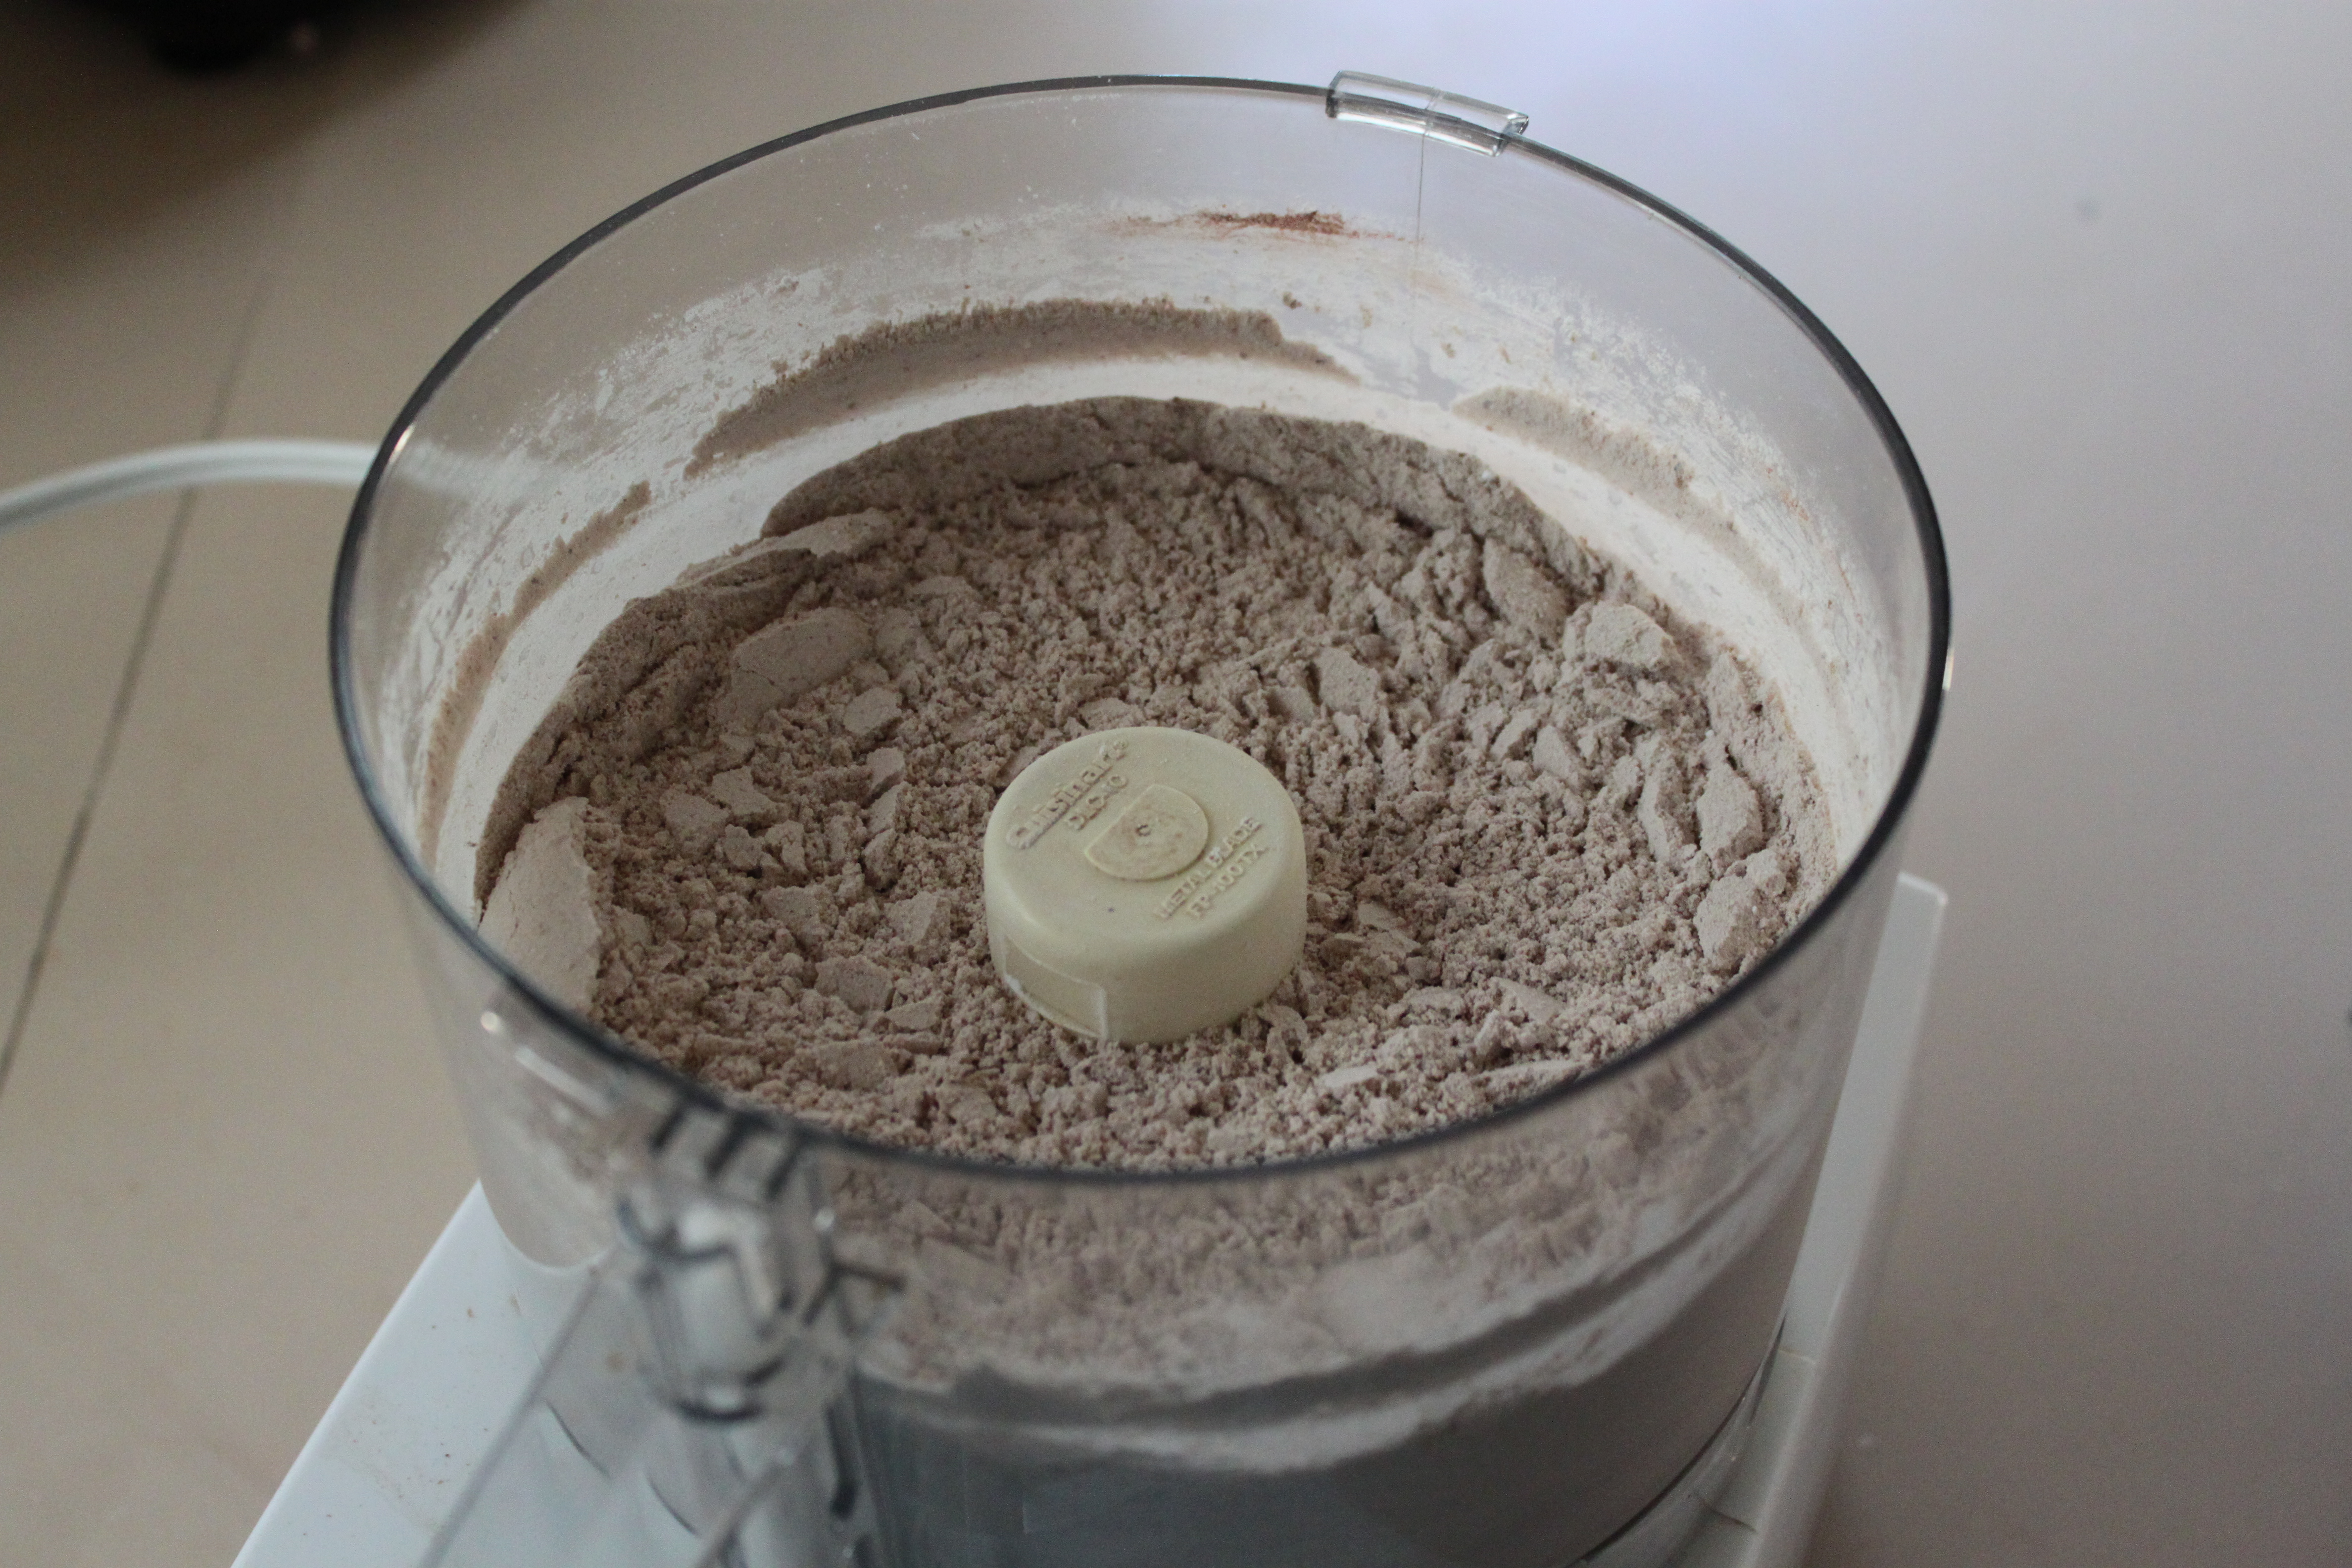 Blend cocoa powder, almond meal and powdered sugar